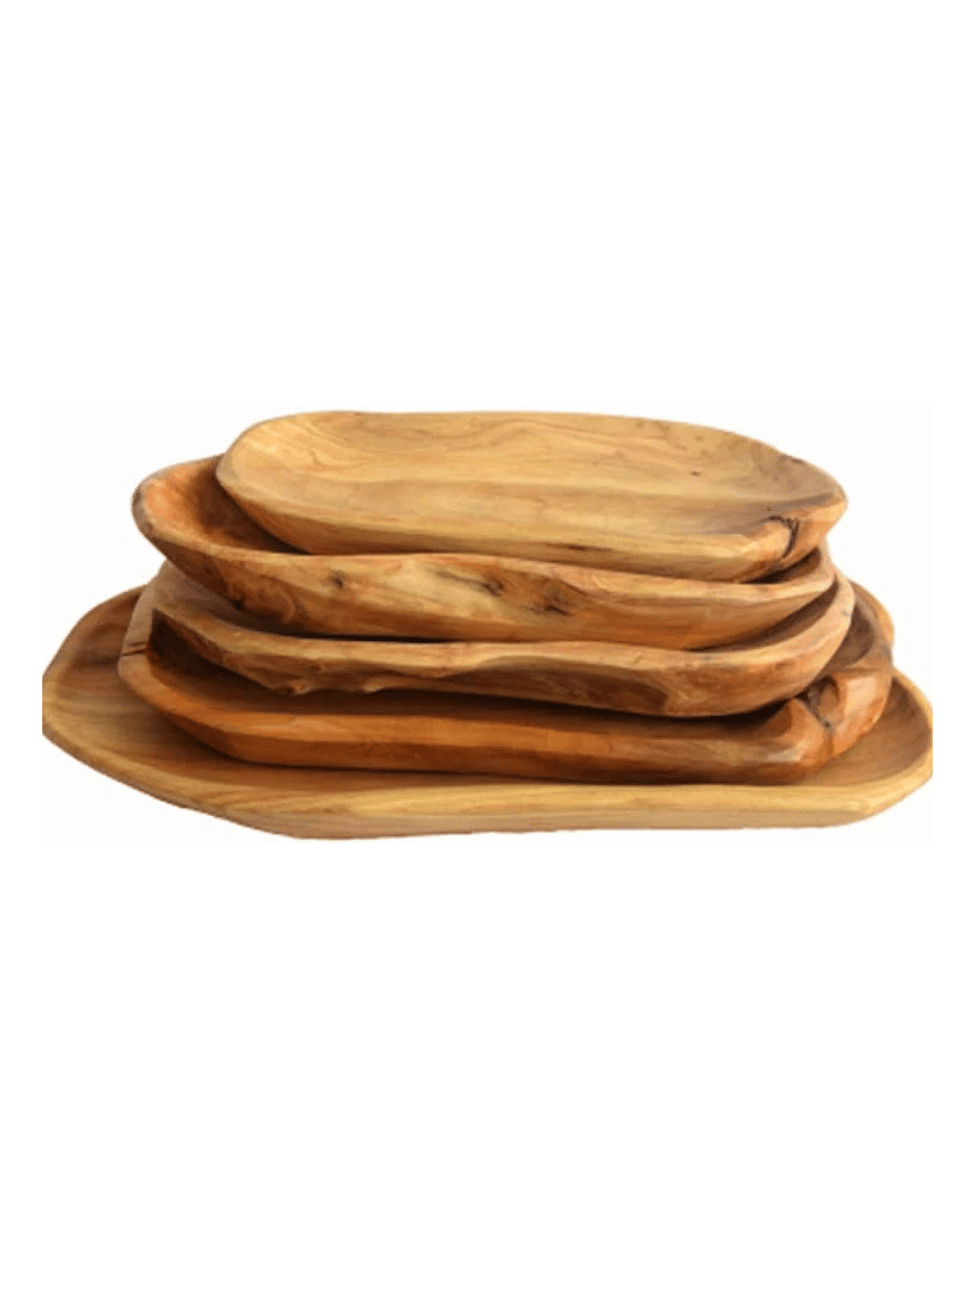 Versatile and Easy-Clean Solid Wood Dinner Plate for All Occasions.